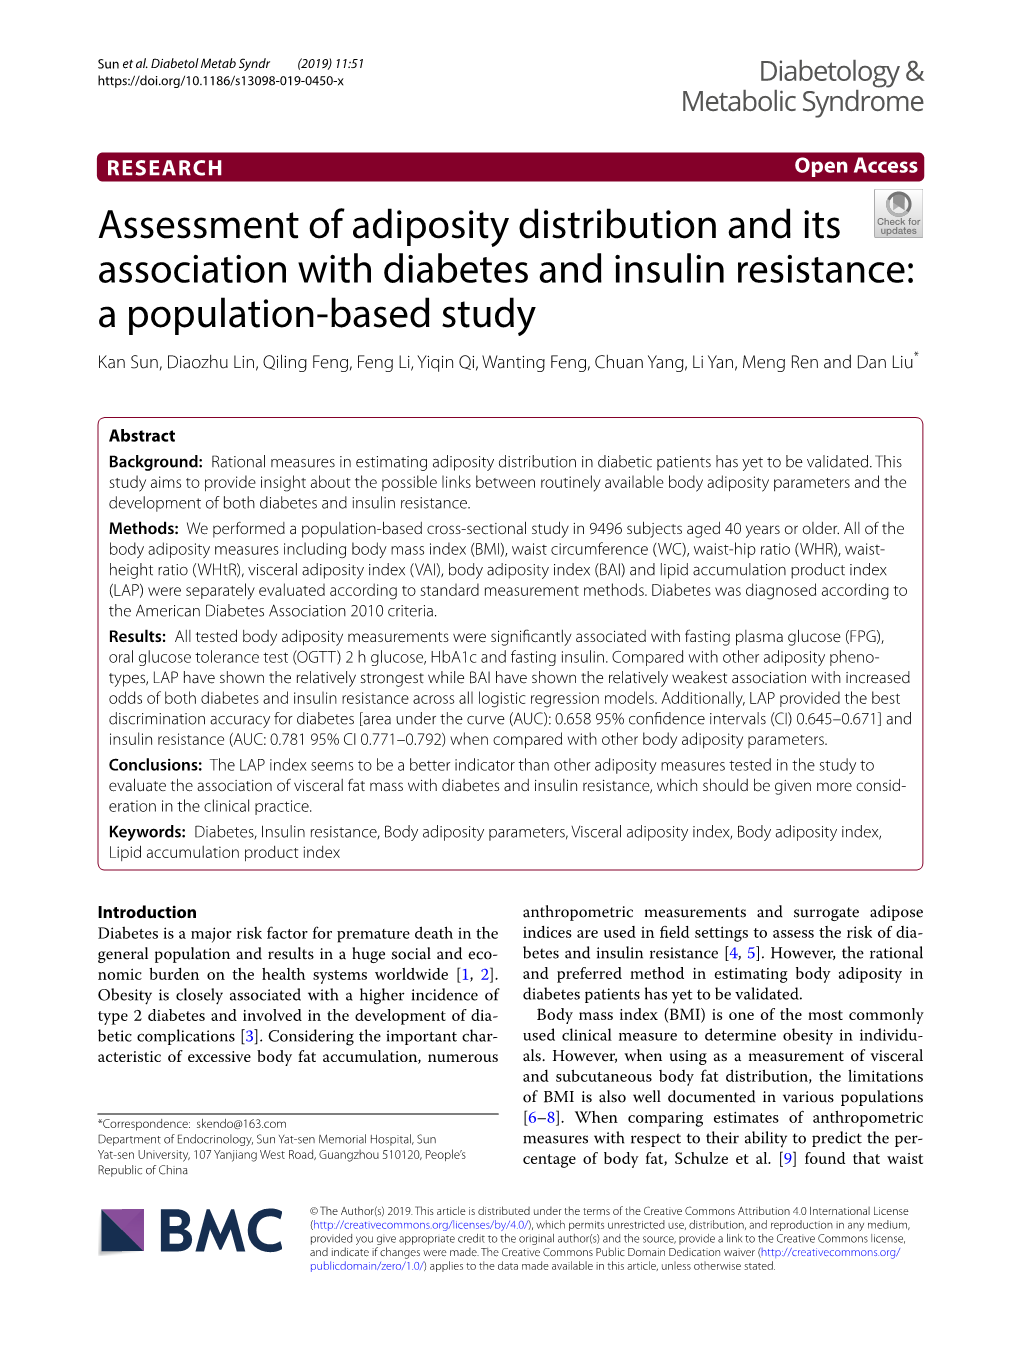 Assessment of Adiposity Distribution and Its Association with Diabetes and Insulin Resistance